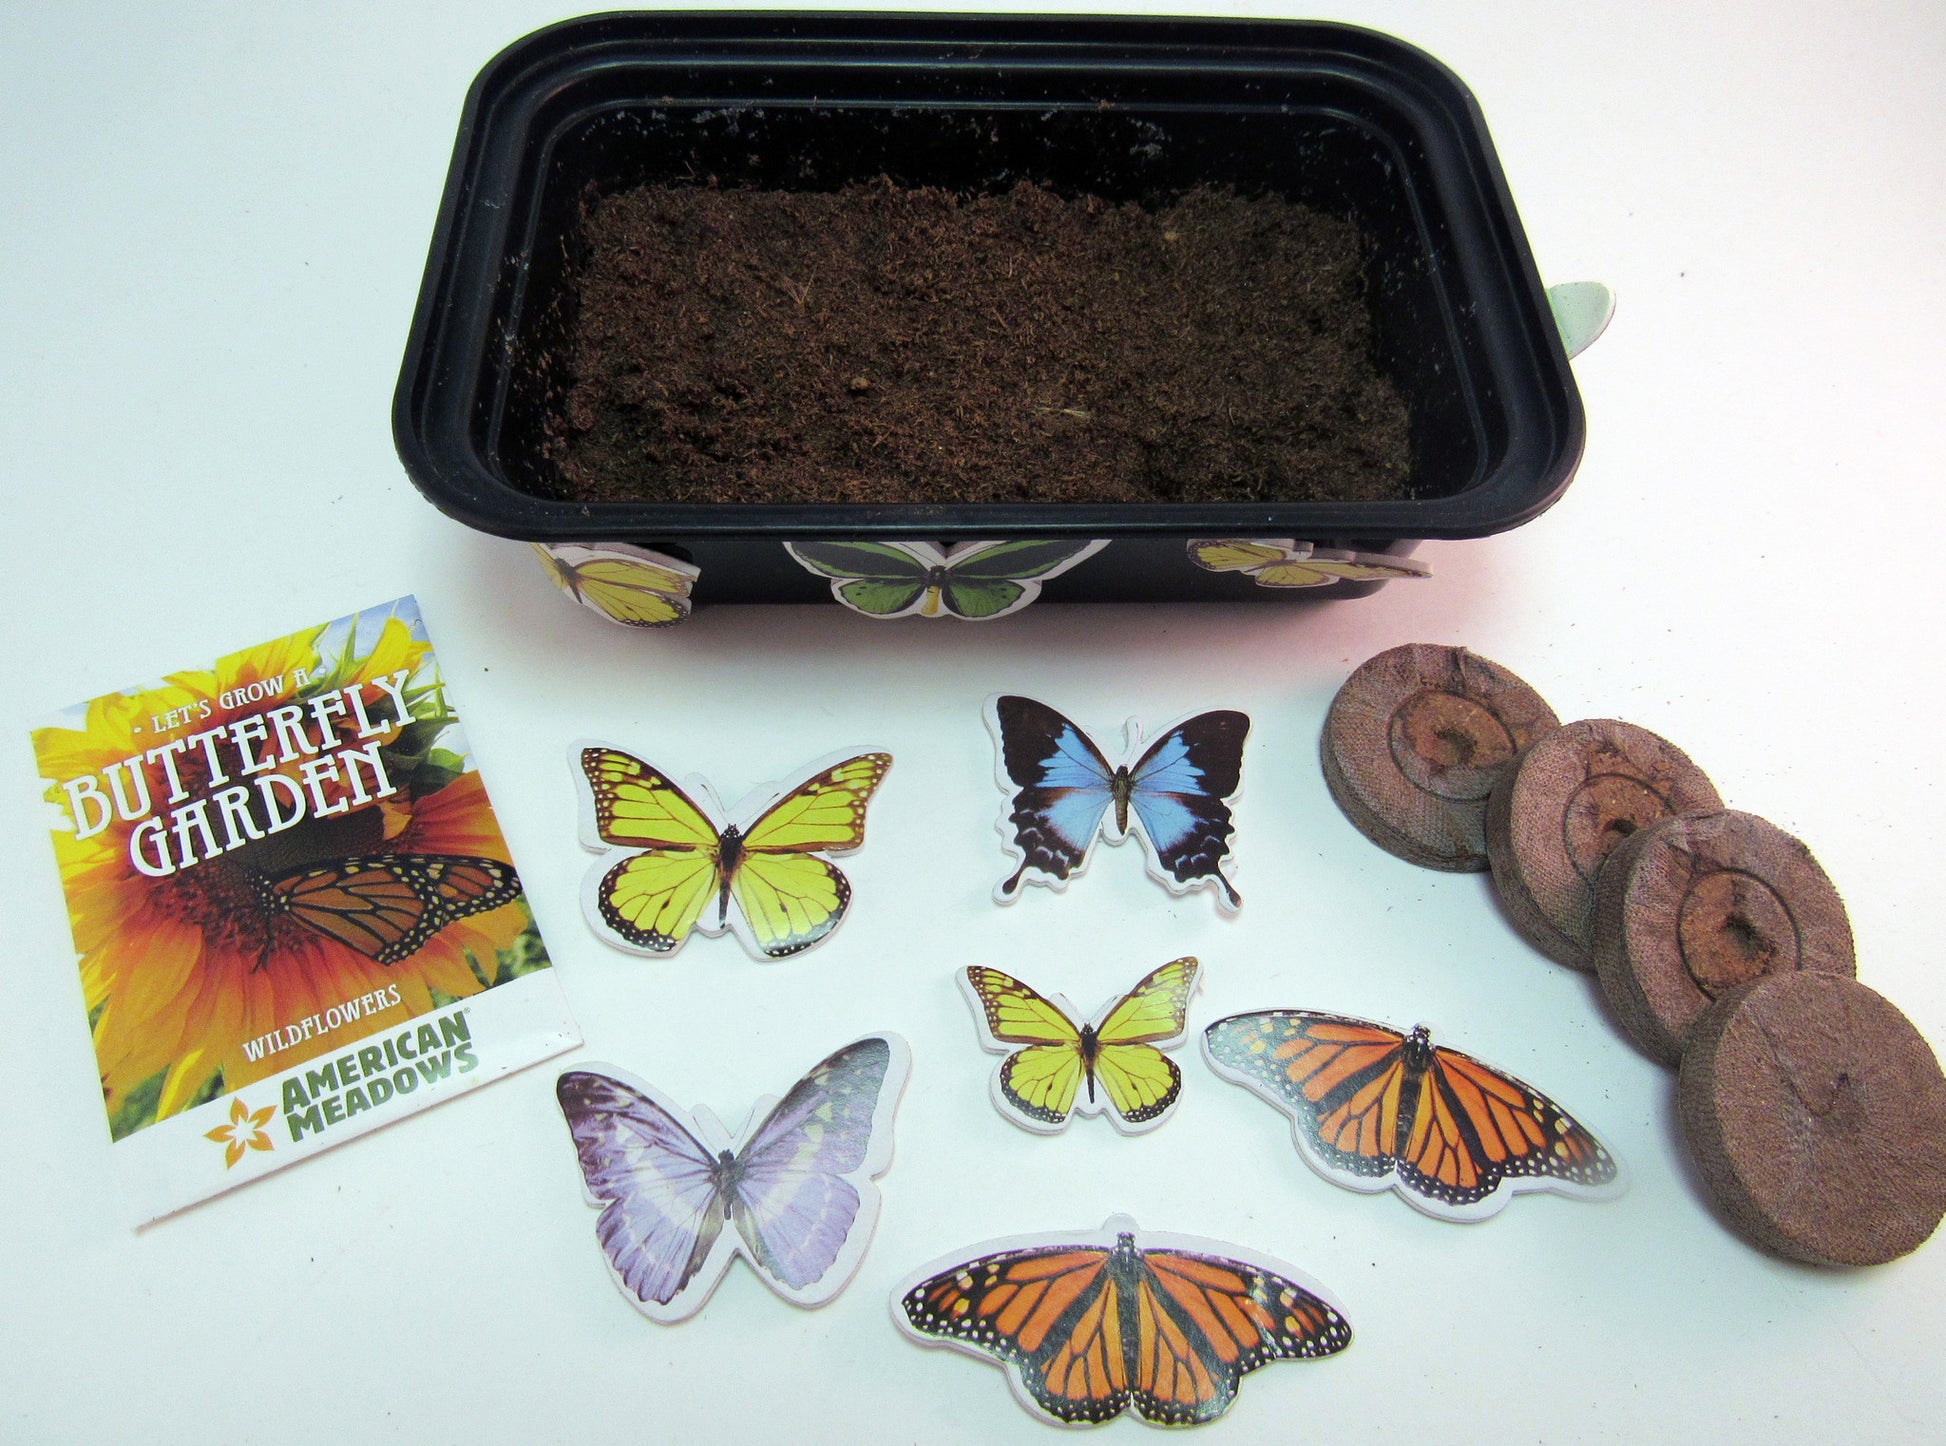 Plant a wildflower garden to attract butterflies - Ivy Kids Educational Activity Kit featuring the book Gotta Go! Gotta Go! by Sam Swope and over 10 art, literacy, math, and science activities inspired by the story. Learn about monarch butterflies. Perfect kit for spring.